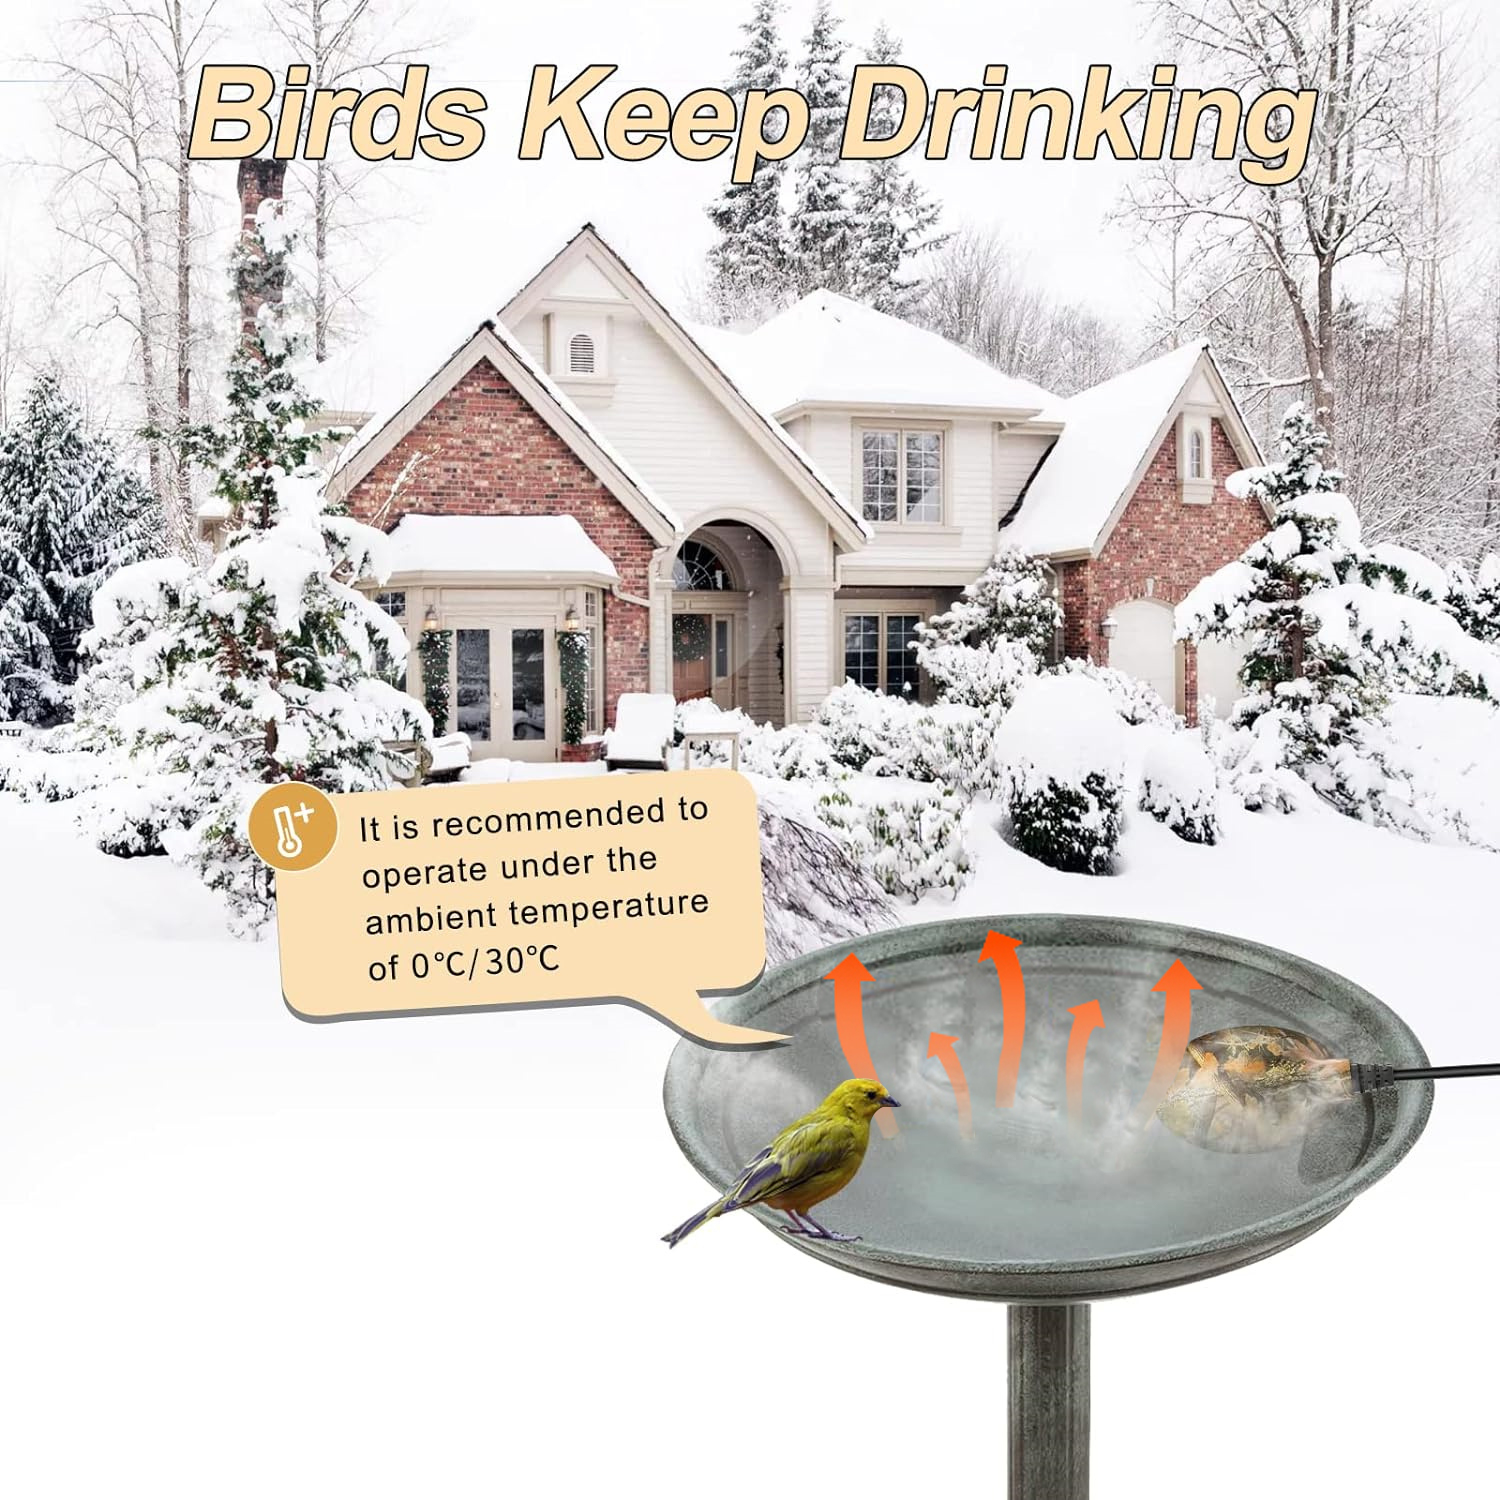 Upgrade Bird Bath Heater for Outdoors in Winter, Thermostatically Controlled, No Water Scale Formation